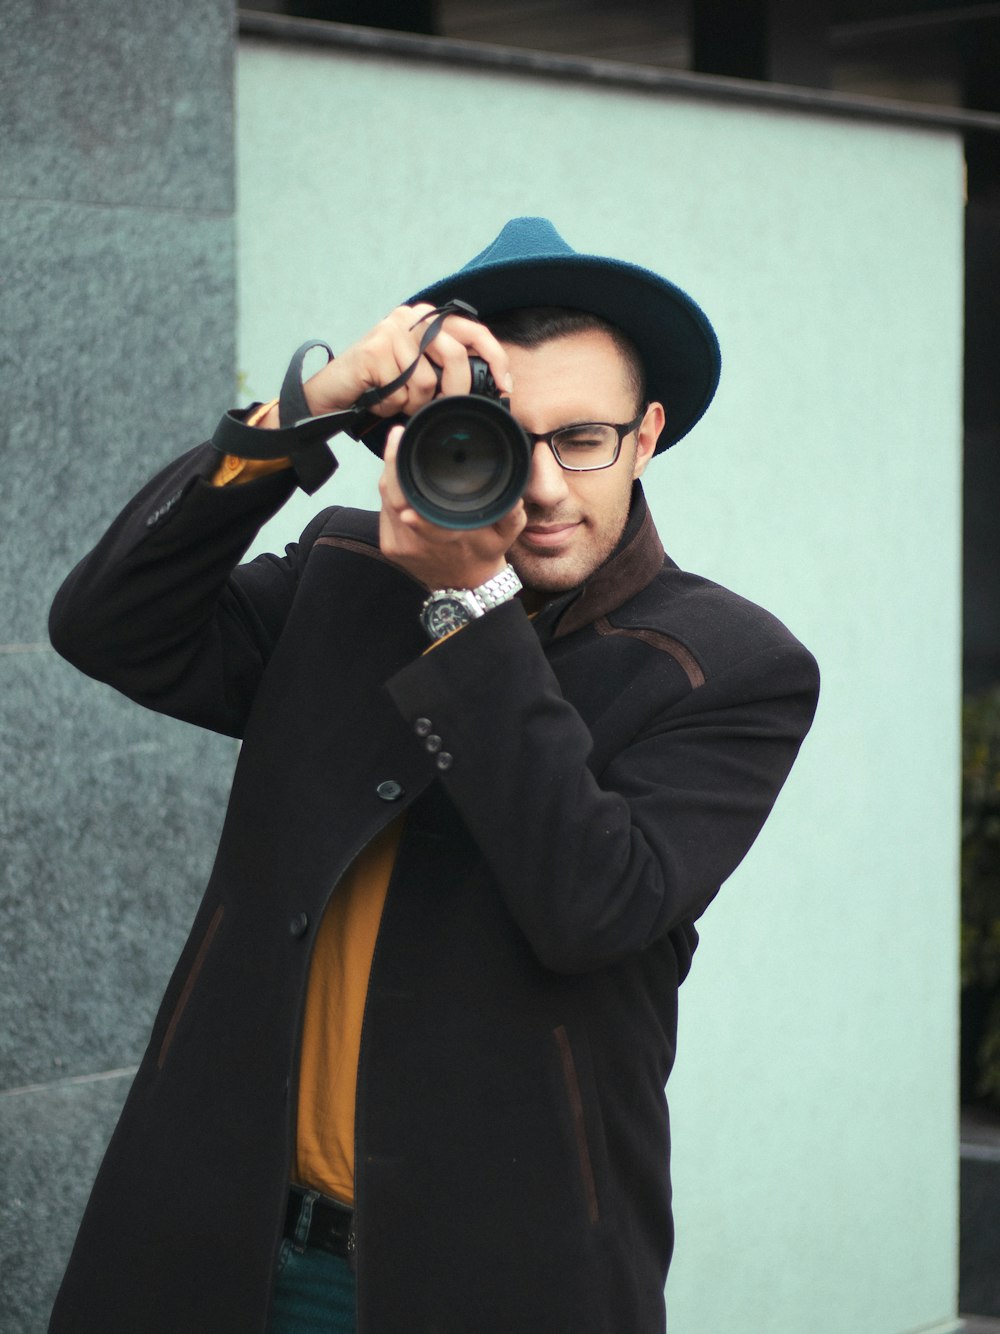 a man with a hat and glasses taking a picture with a camera